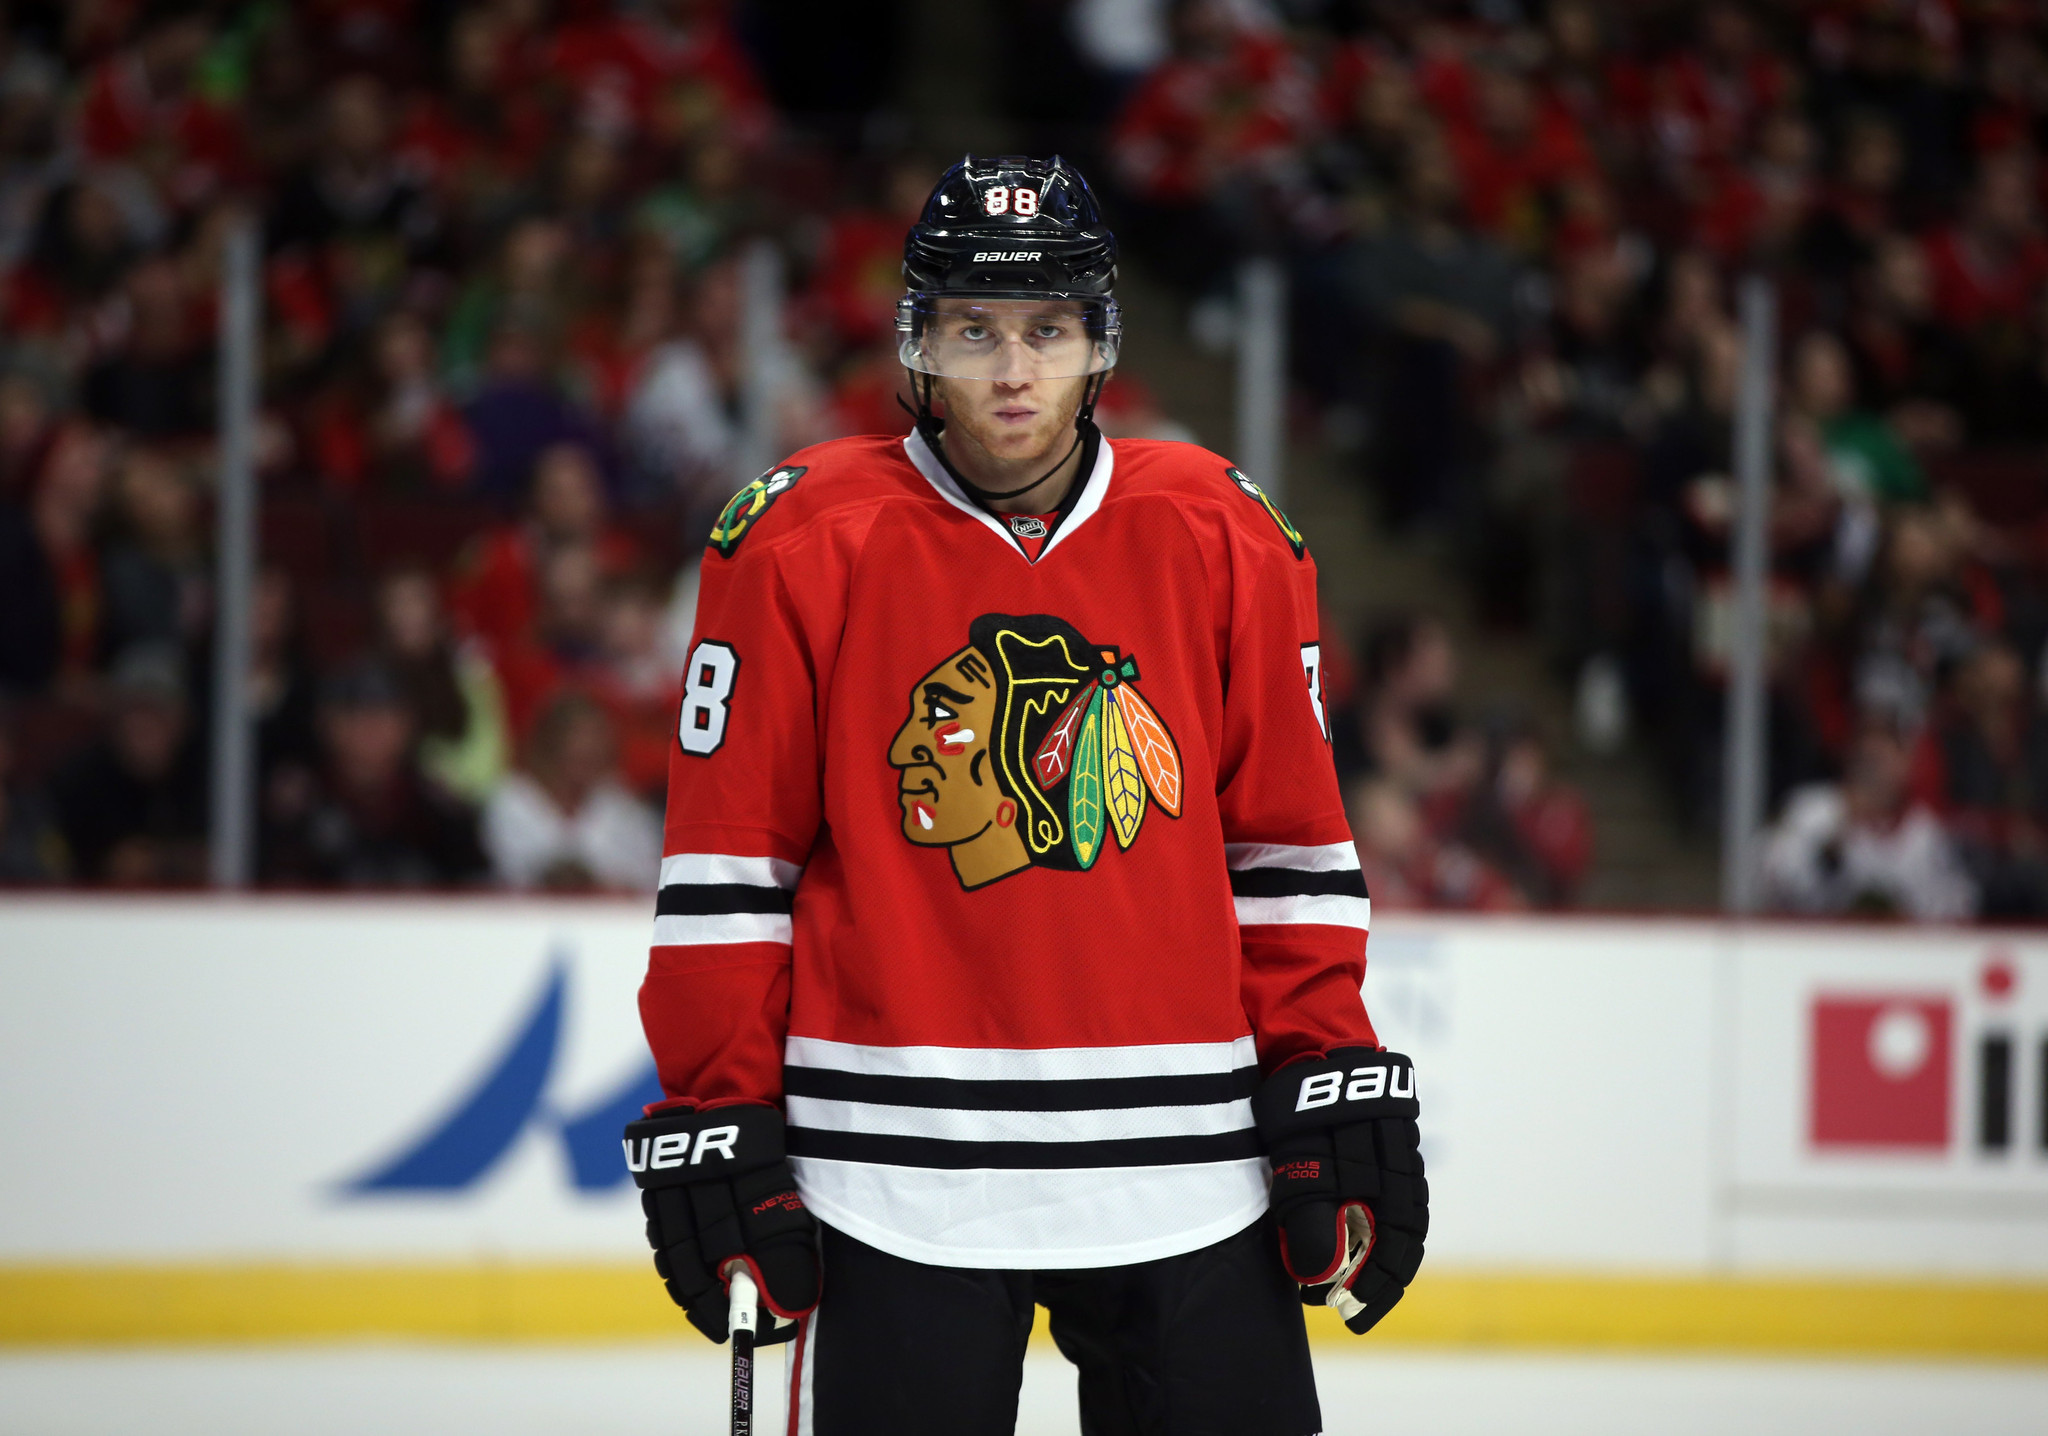 2048x1436 Quick Hits: NHL All Star Game, Patrick Kane, and the Dennis Wideman hit |